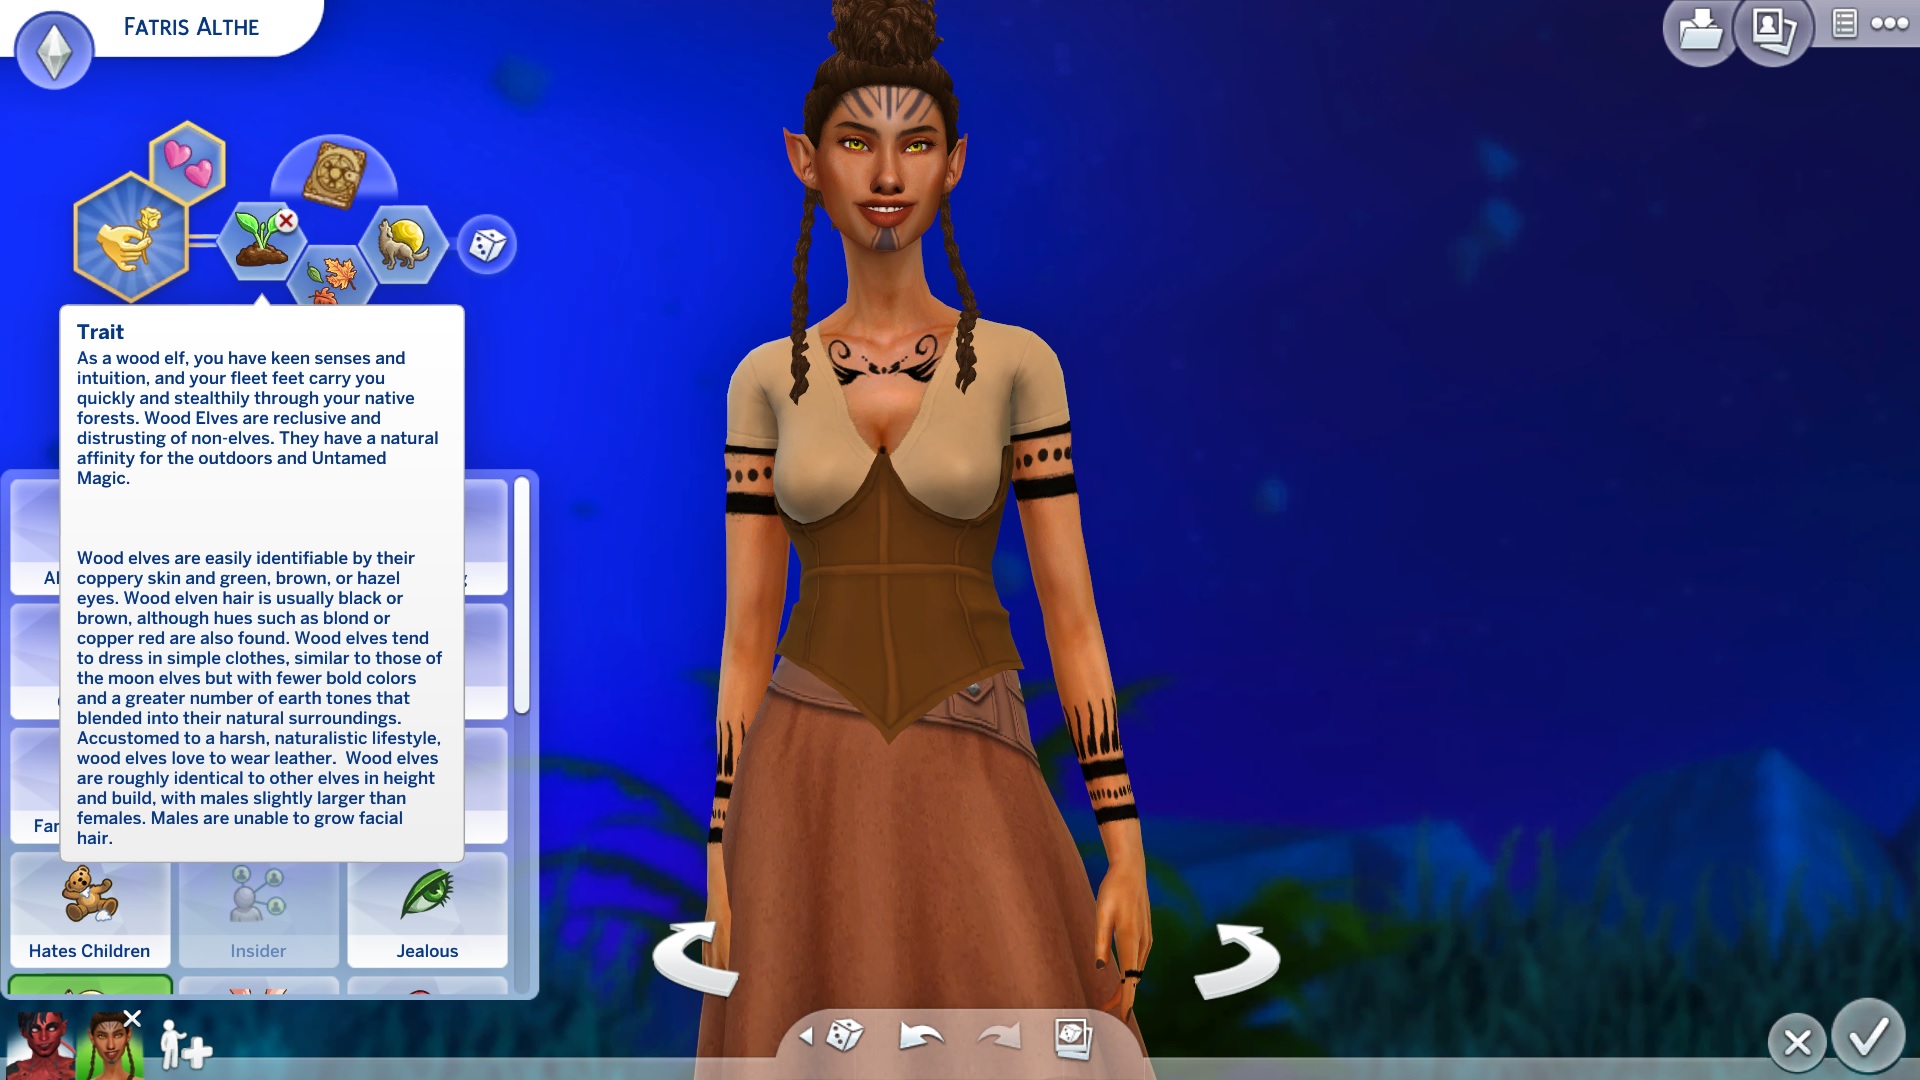 sims 4 mods download 2020